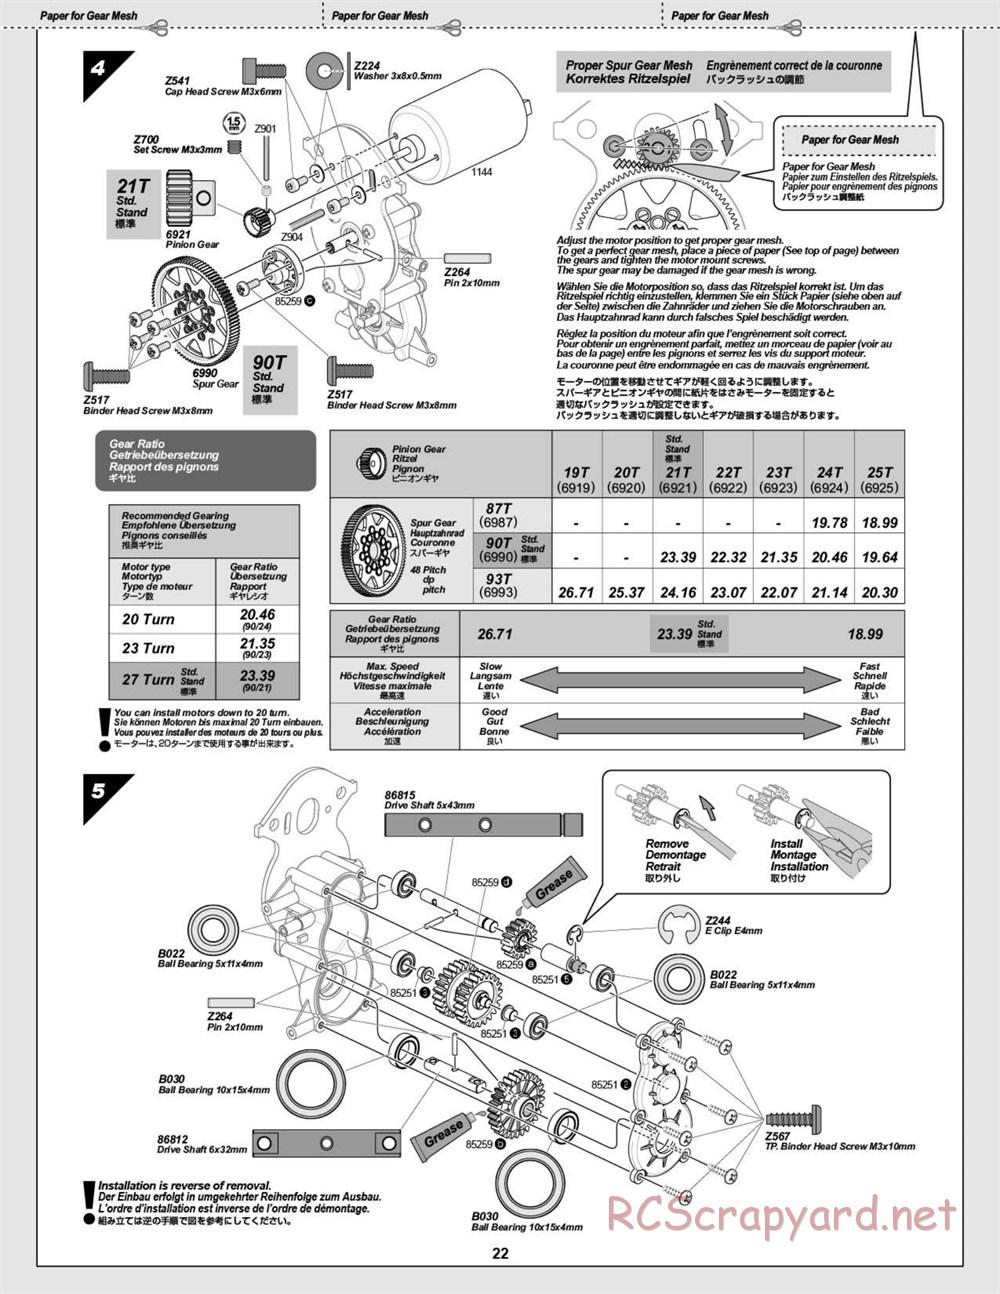 HPI - Wheely King 4x4 - Manual - Page 22